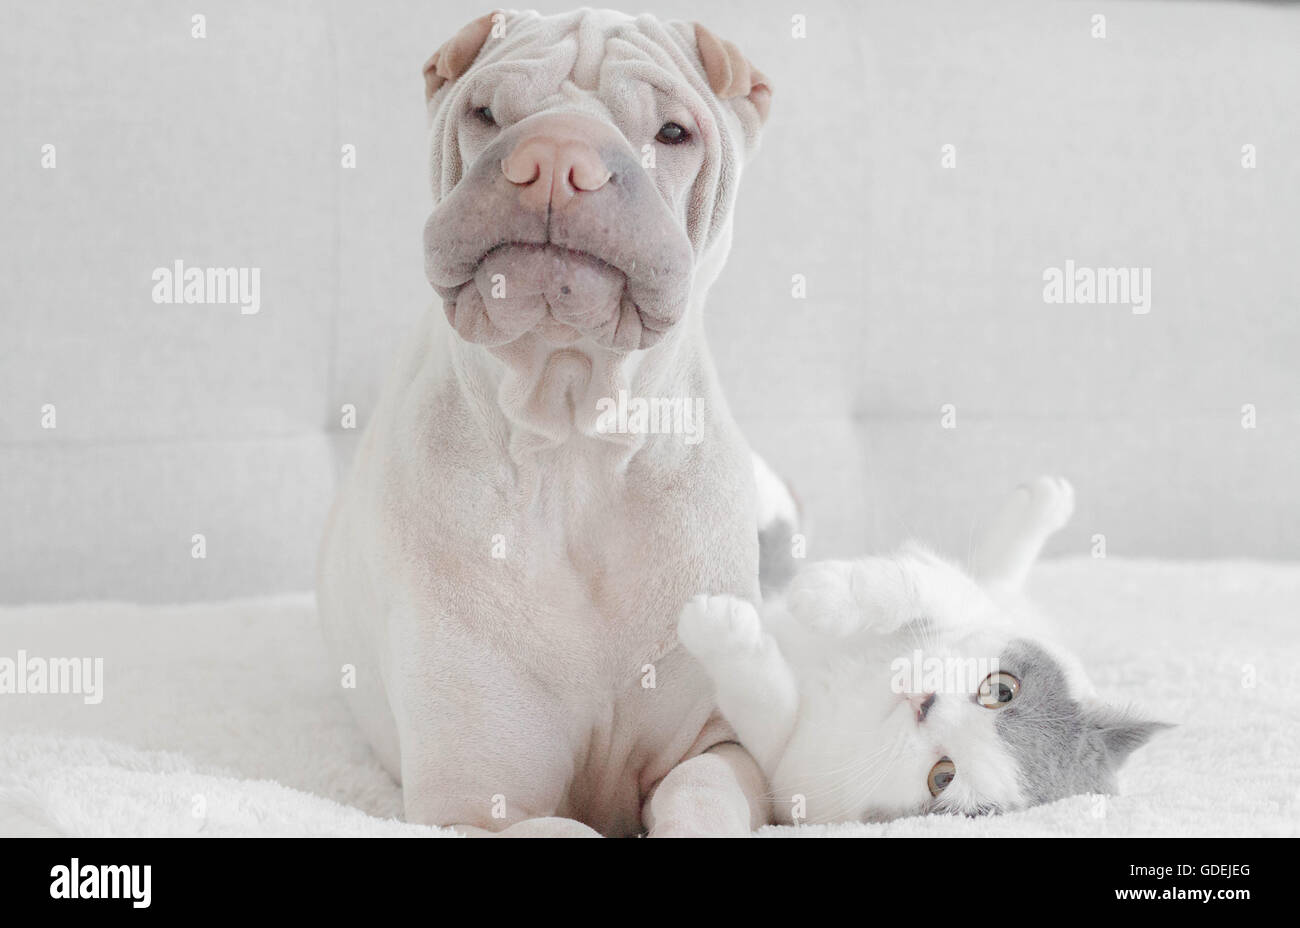 shar pei dog on bed with british shorthair cat Stock Photo